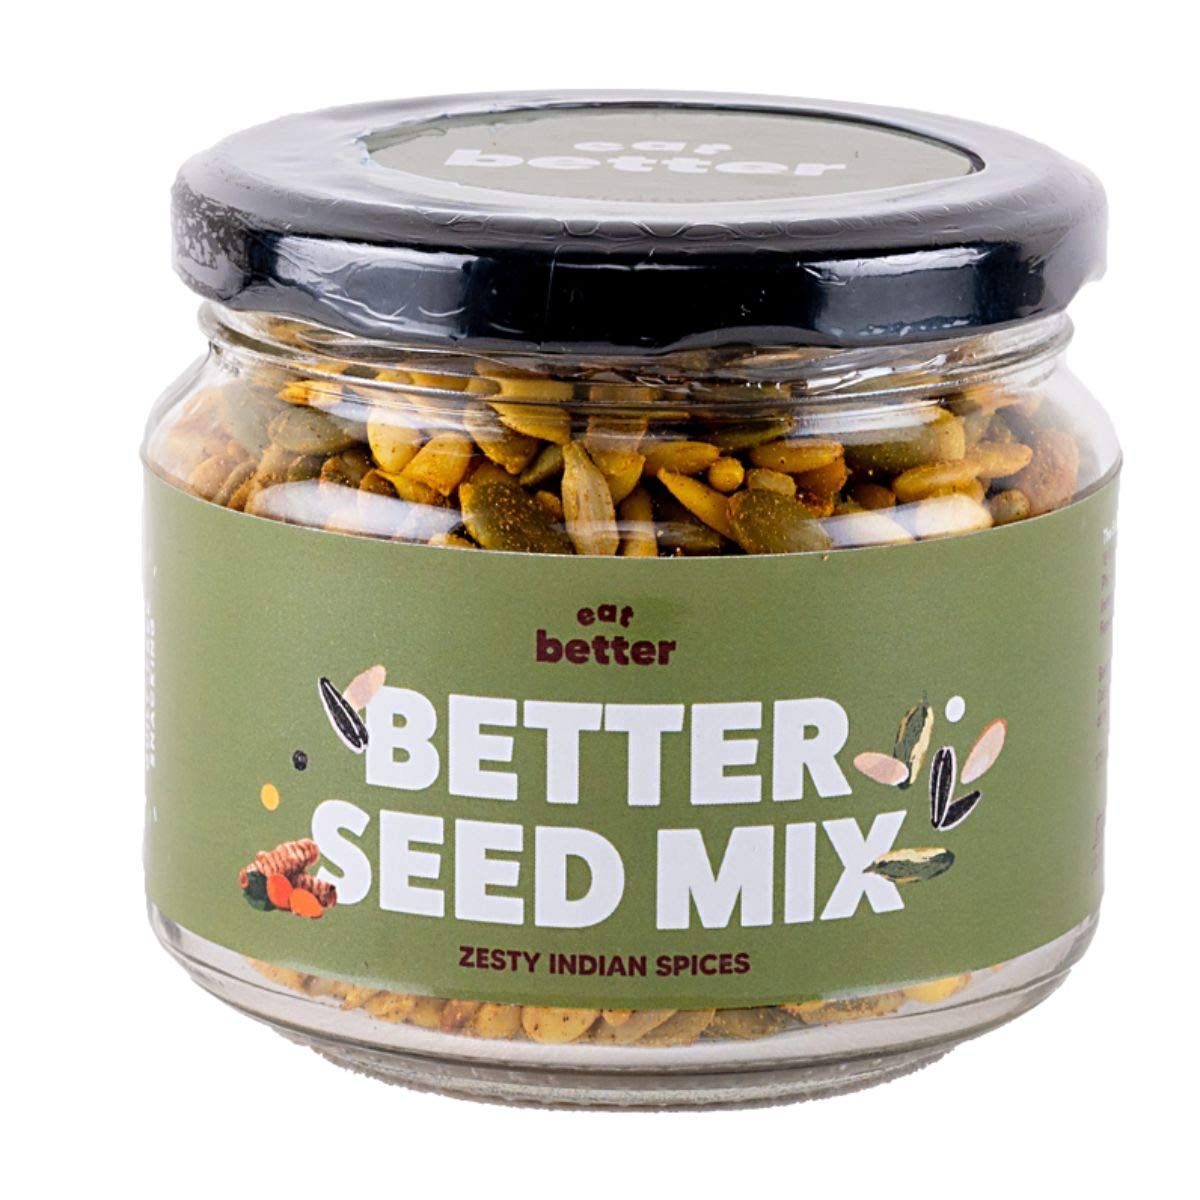 Eat Better Five Seed Mix Image